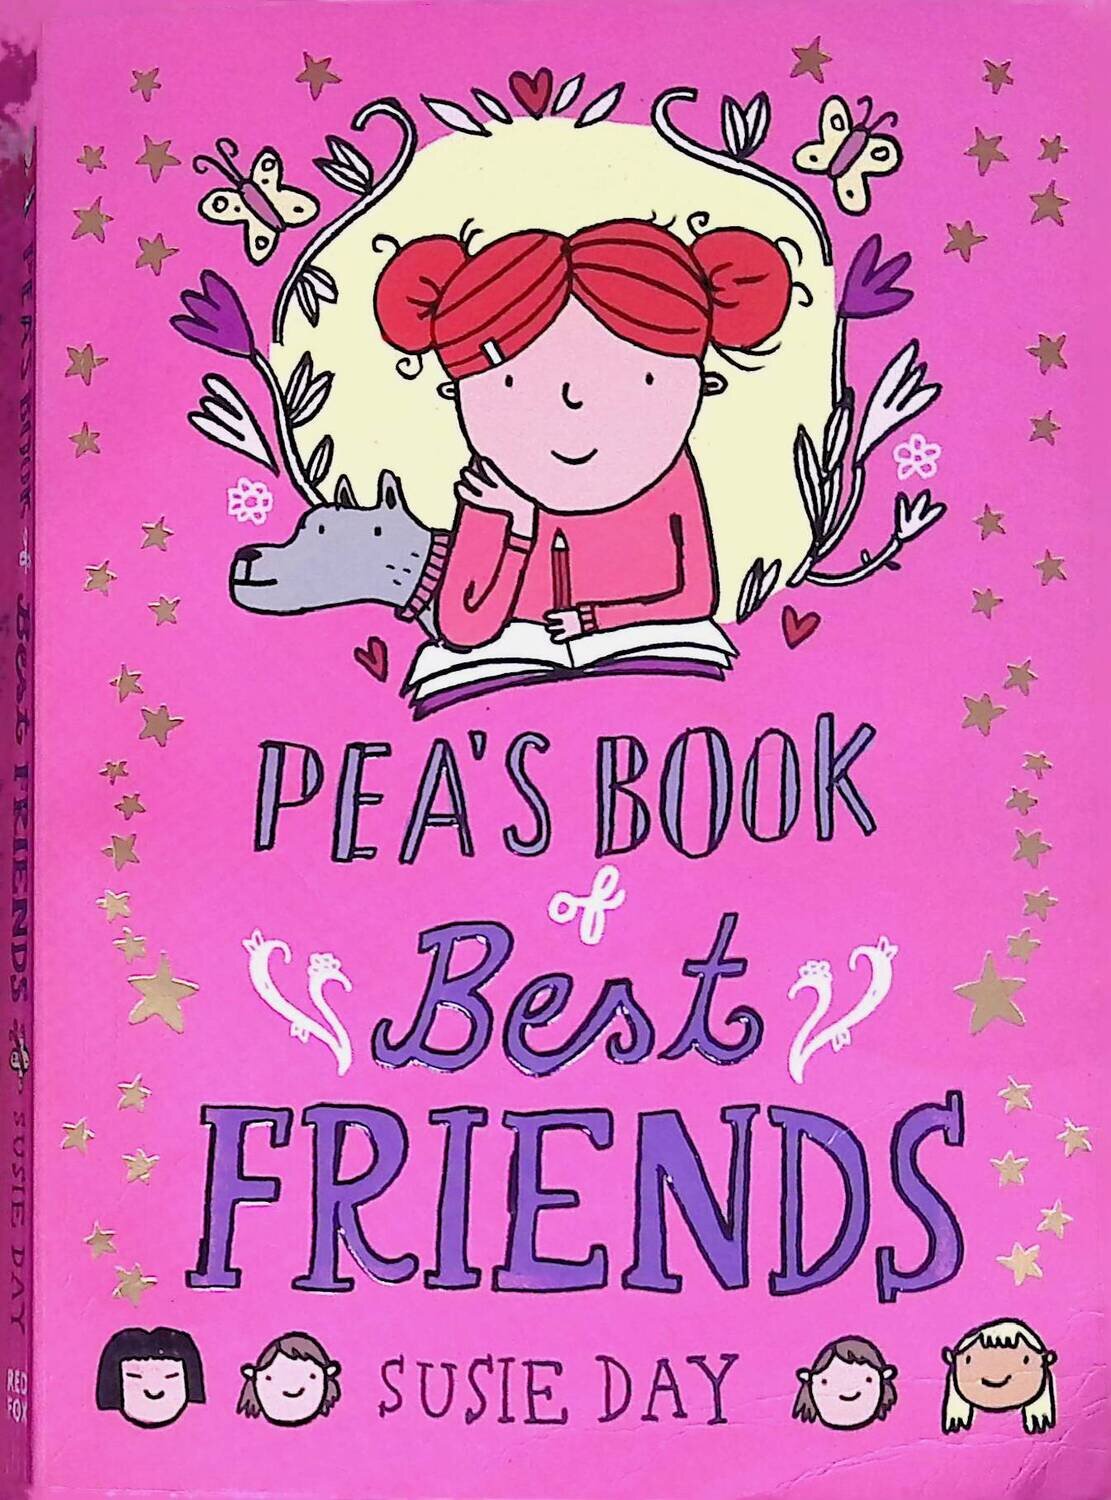 Pea's Book of Best Friends; Day Susie